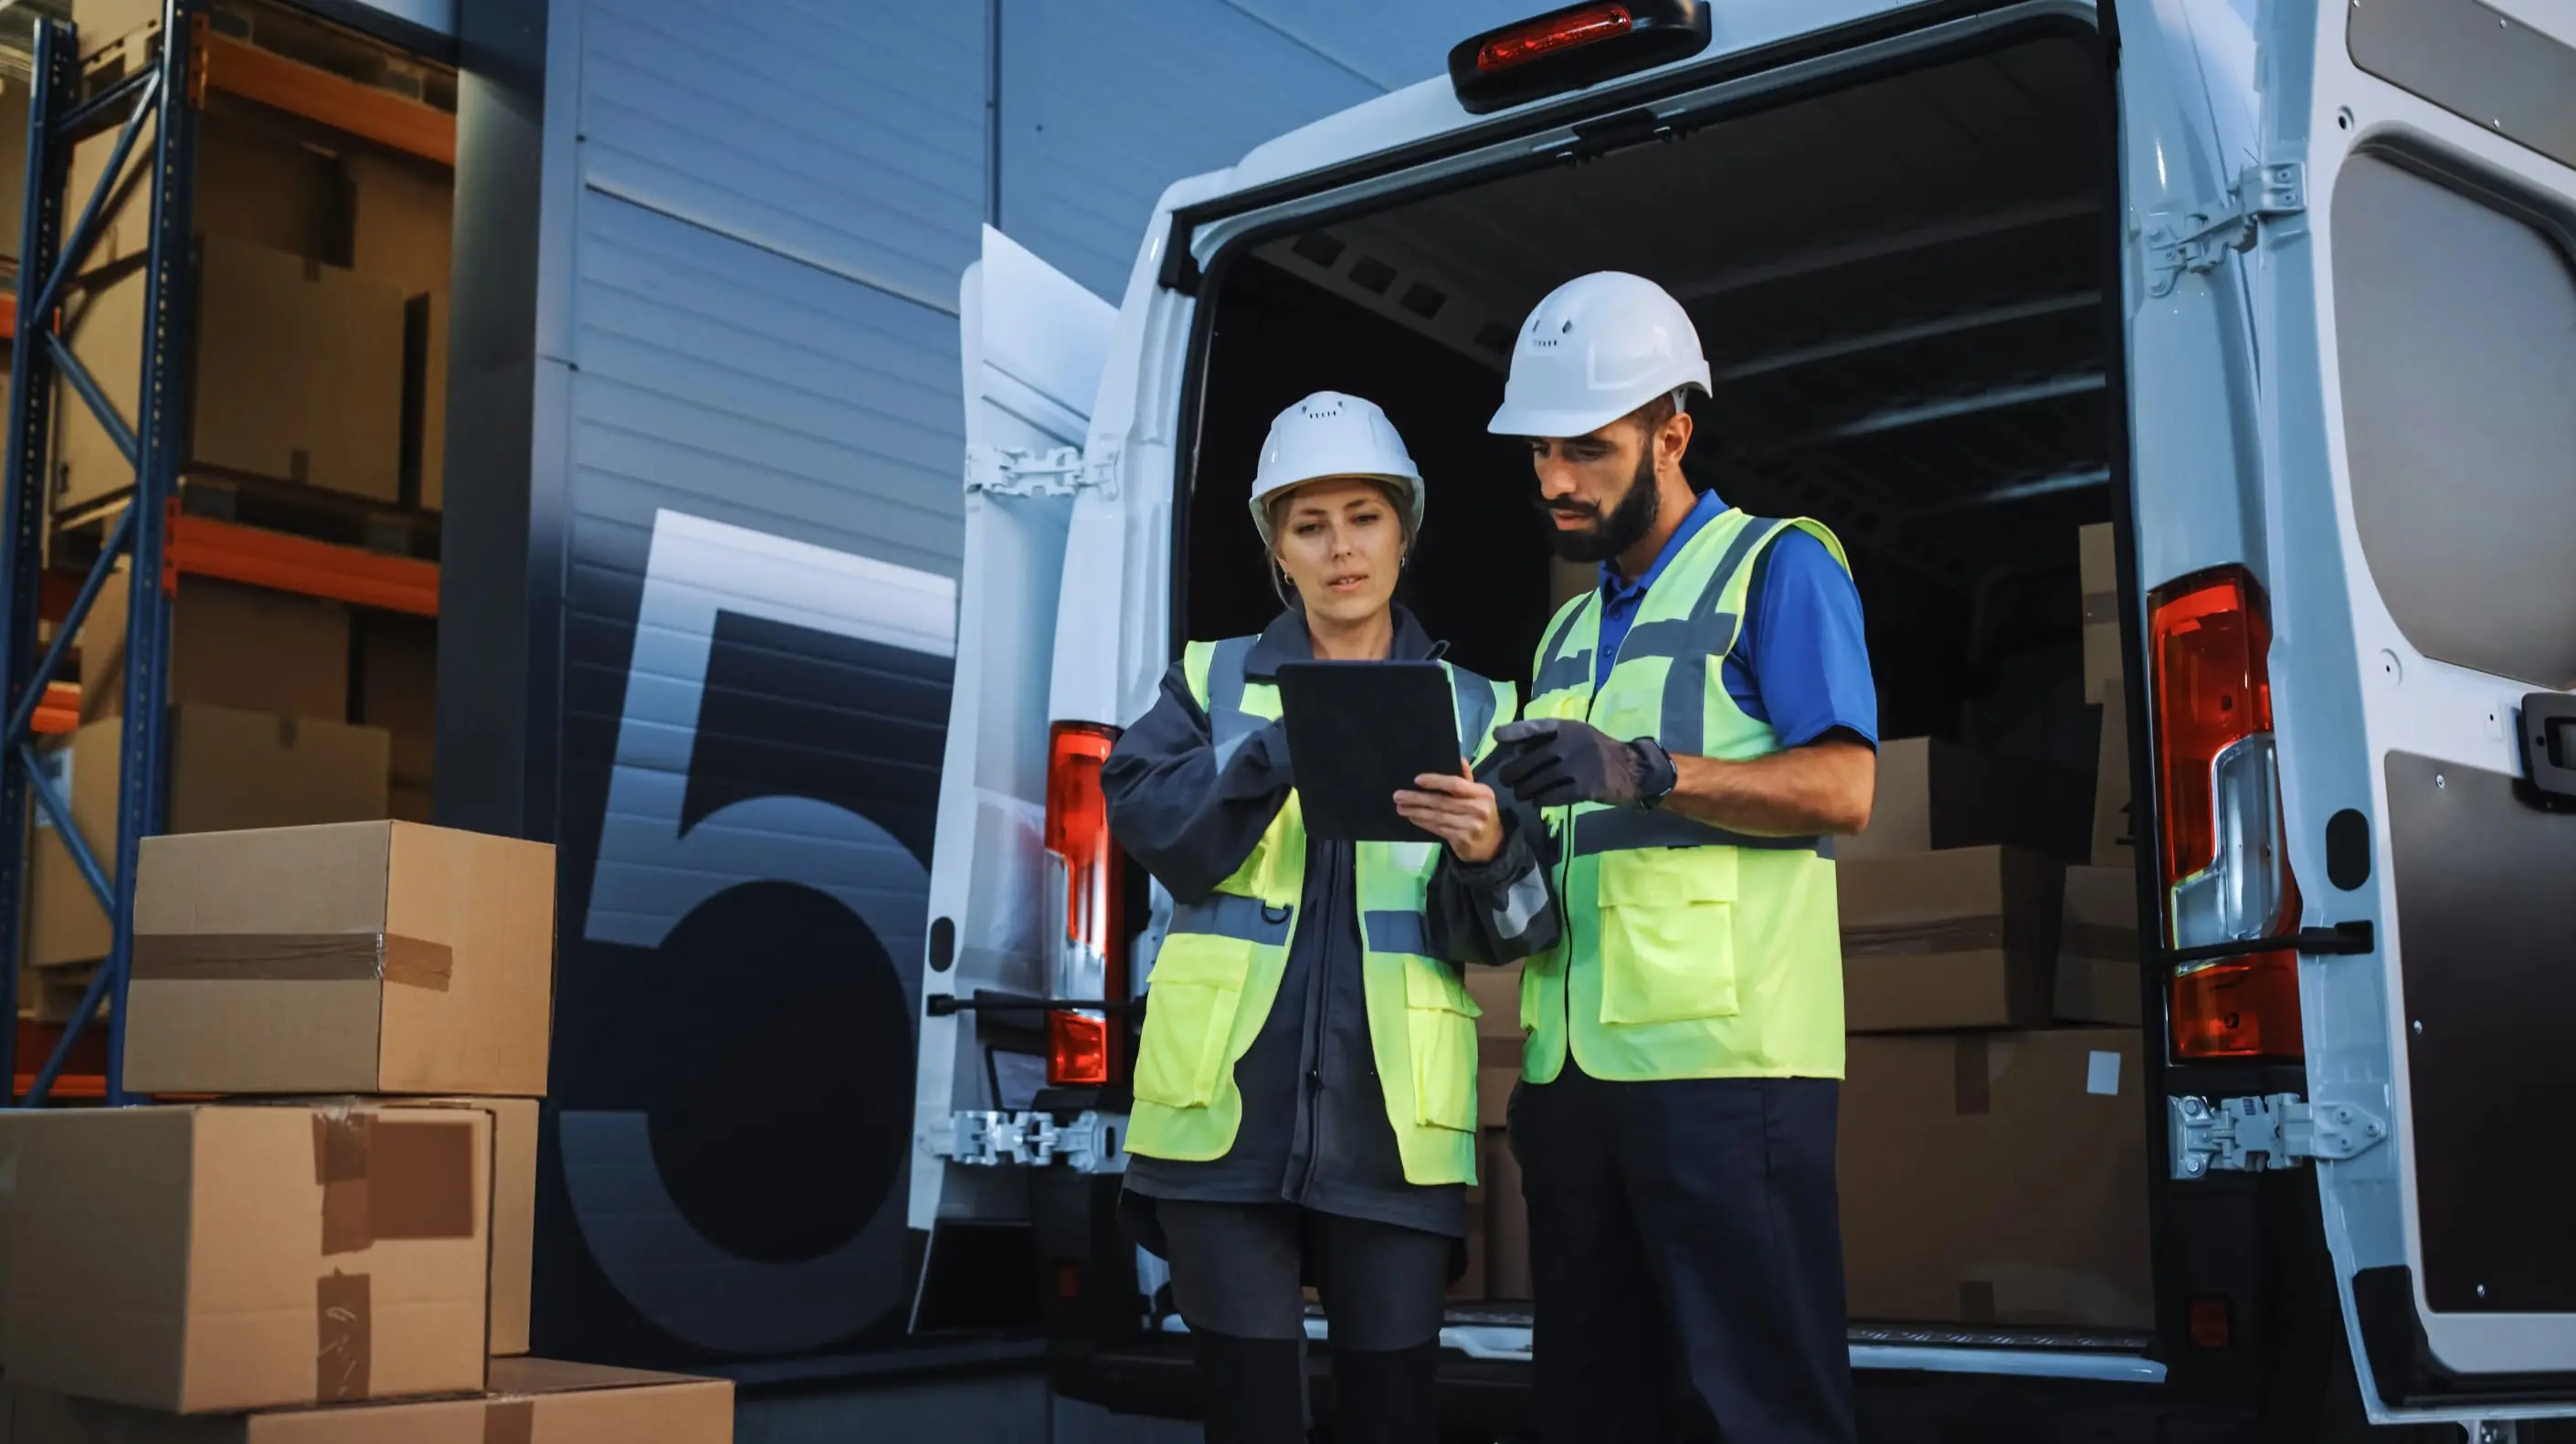 Two fleet managers looking at a tablet, while organizing boxes into a van for transport.